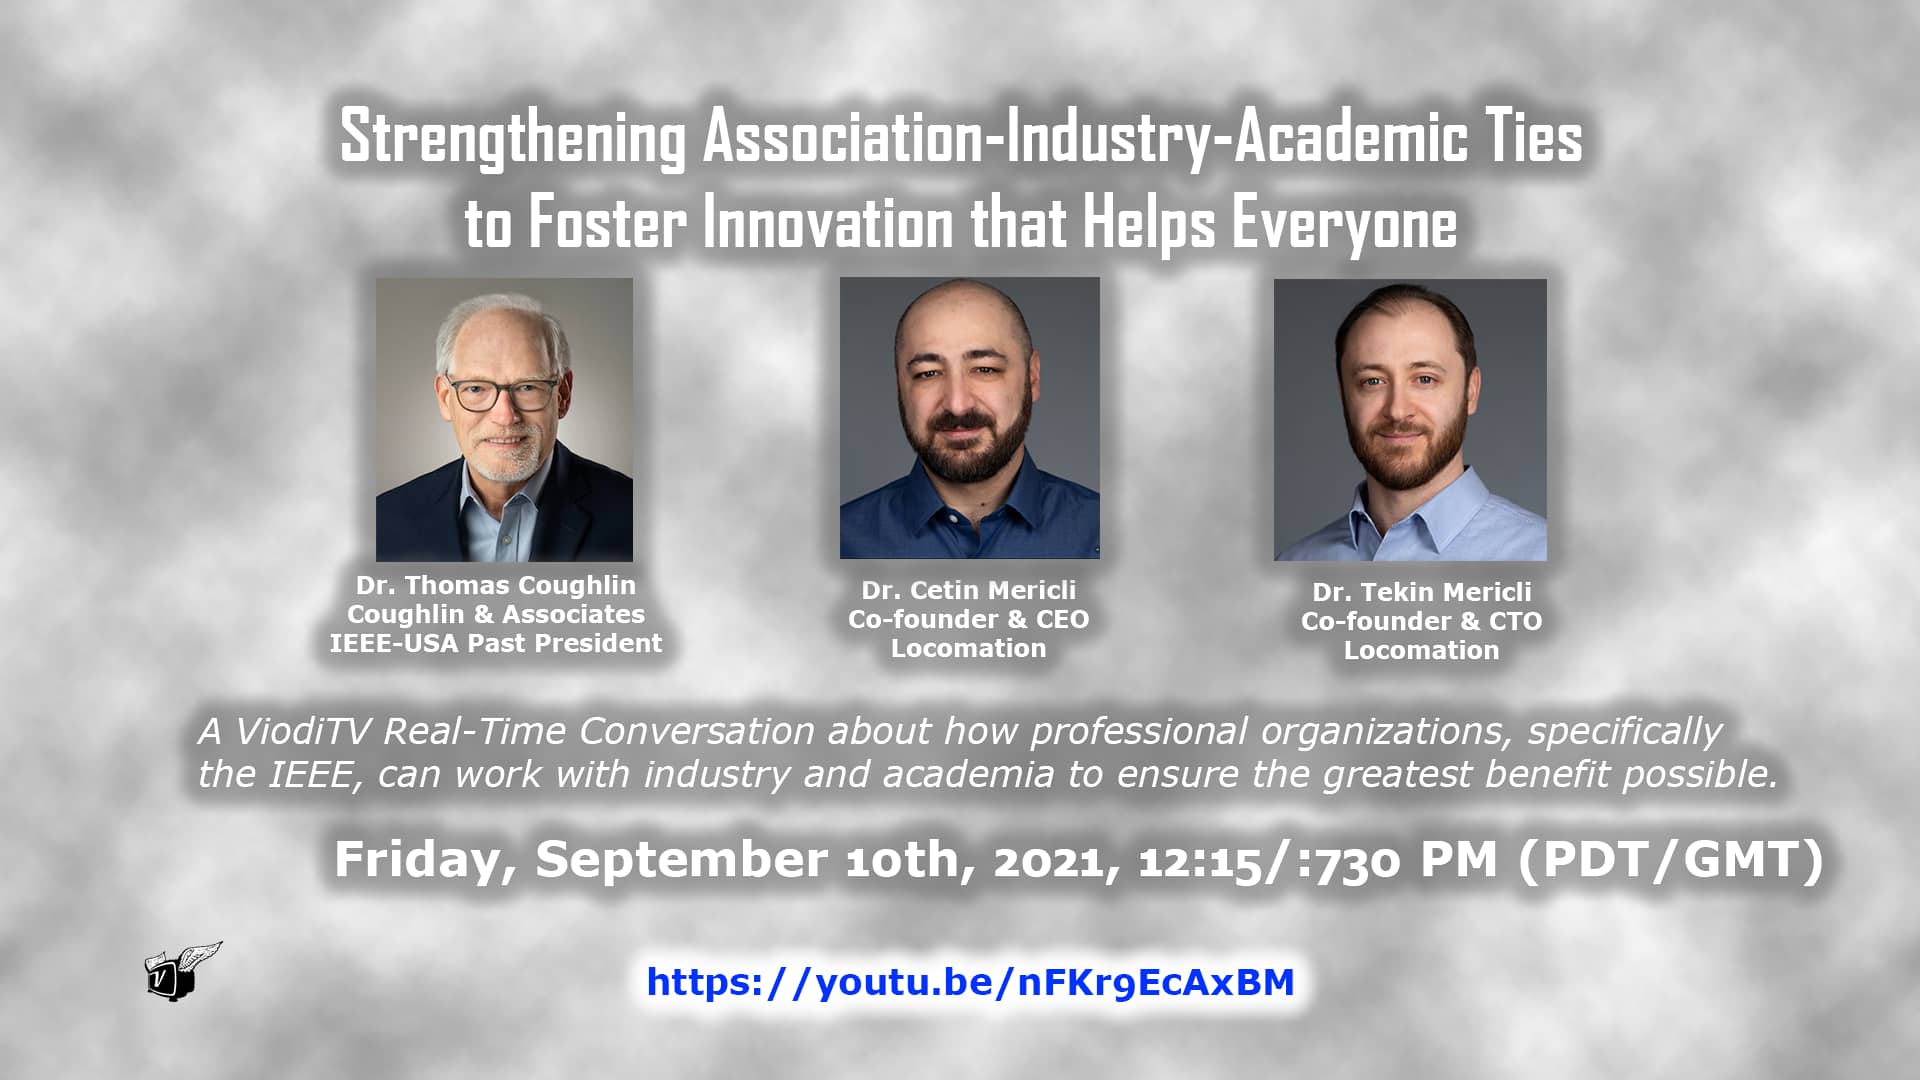 Strengthening Association-Industry-Academic Ties to Foster Innovation that Helps Everyone